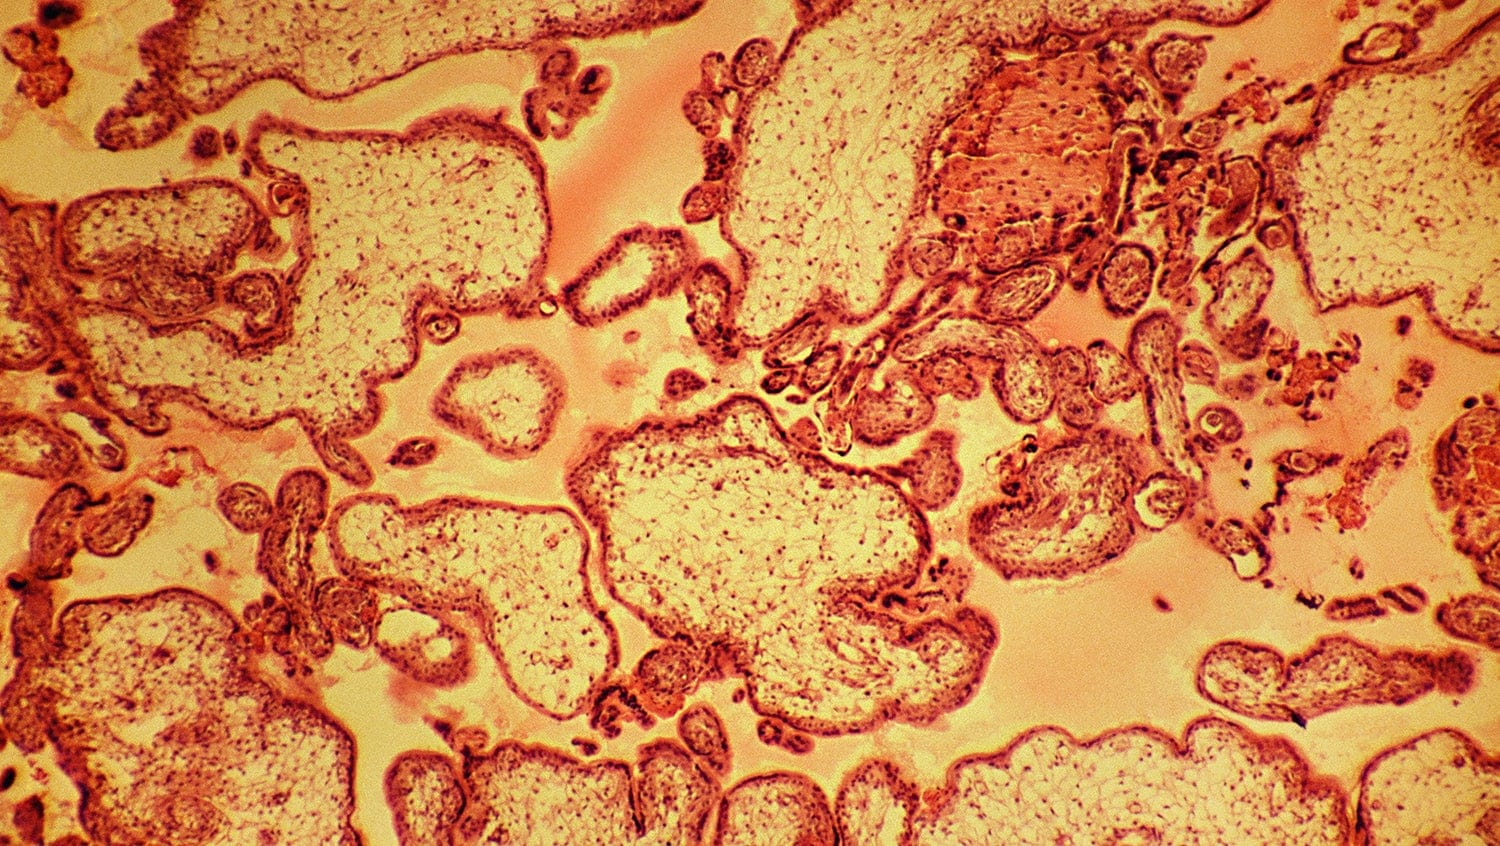 microscopic view of placental tissue